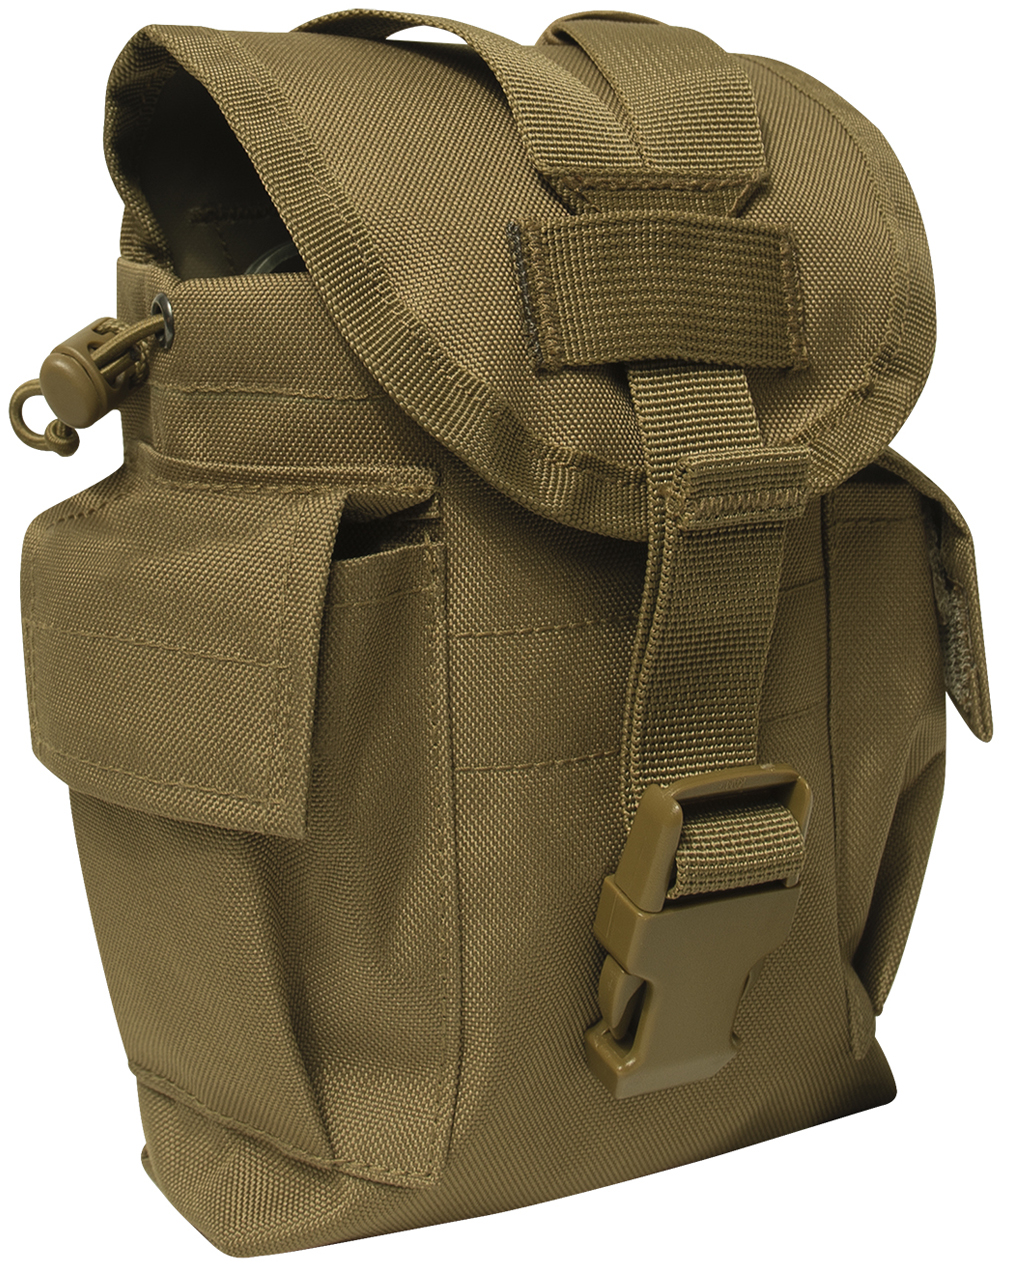 Rothco MOLLE II Canteen & Utility Pouch - Various Colors